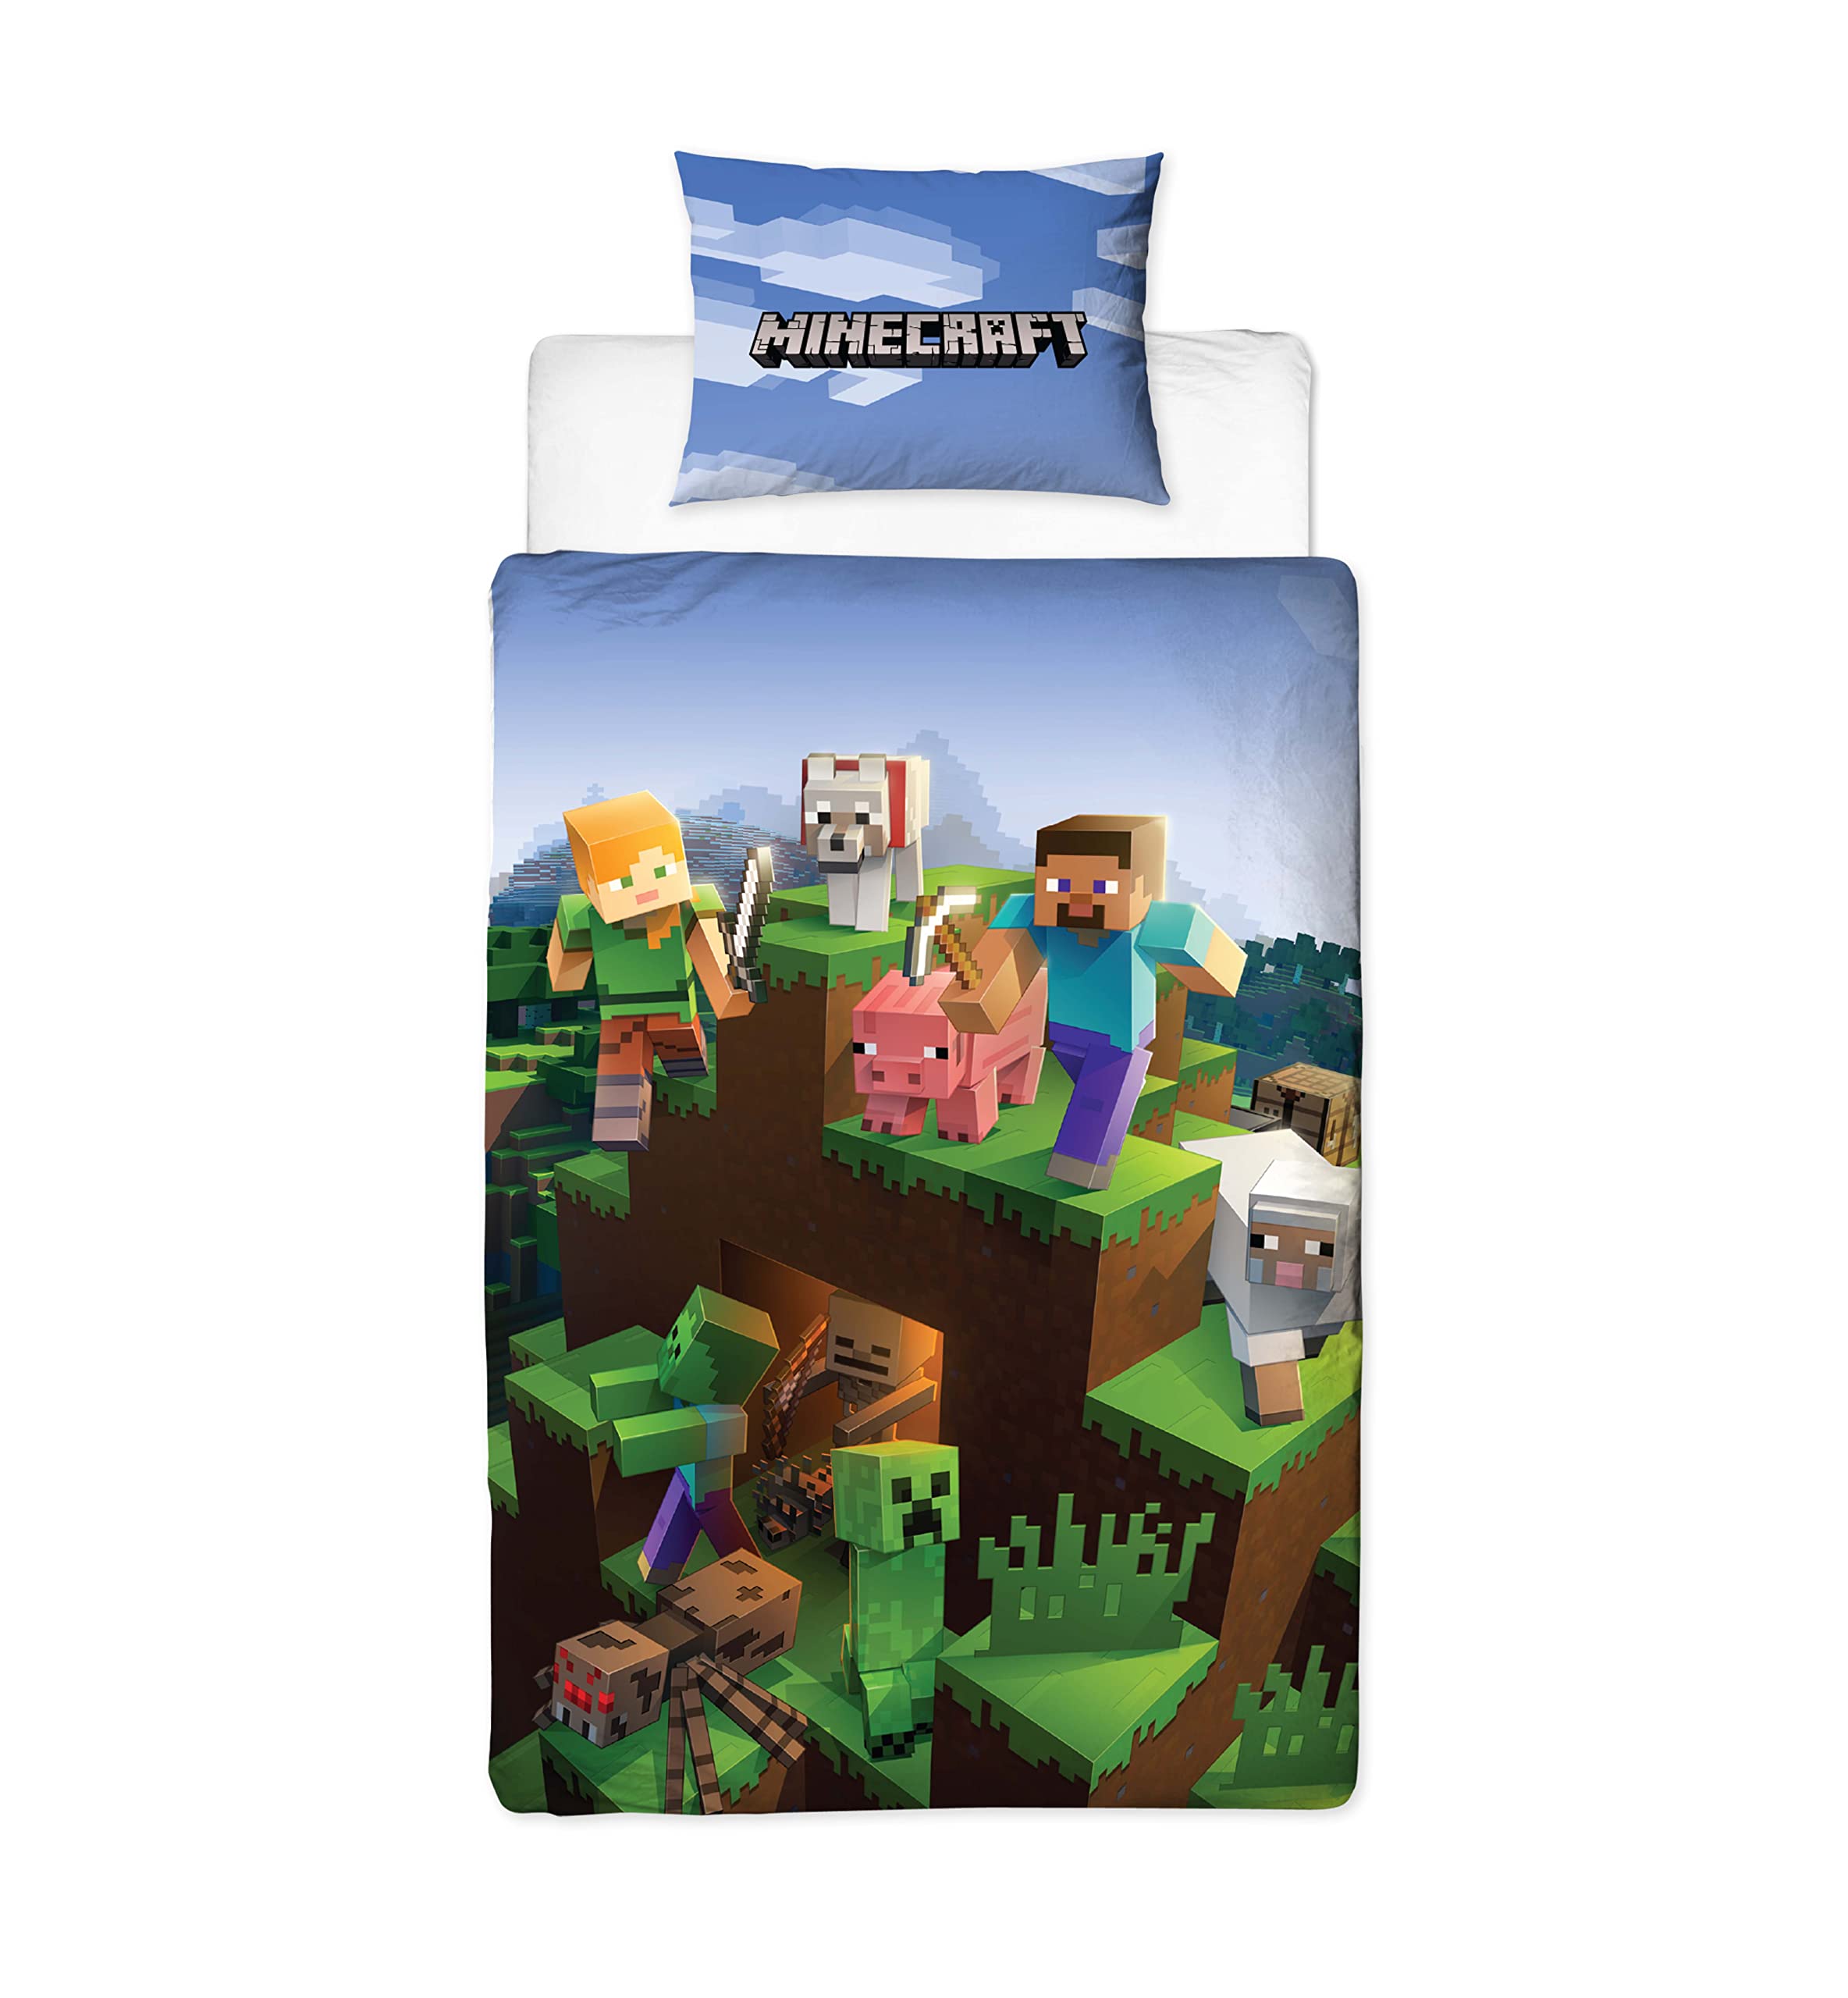 Minecraft Single Duvet Cover Officially Licensed | Reversible 2 Sided Epic Design with Matching Pillowcase, Polycotton (Single)